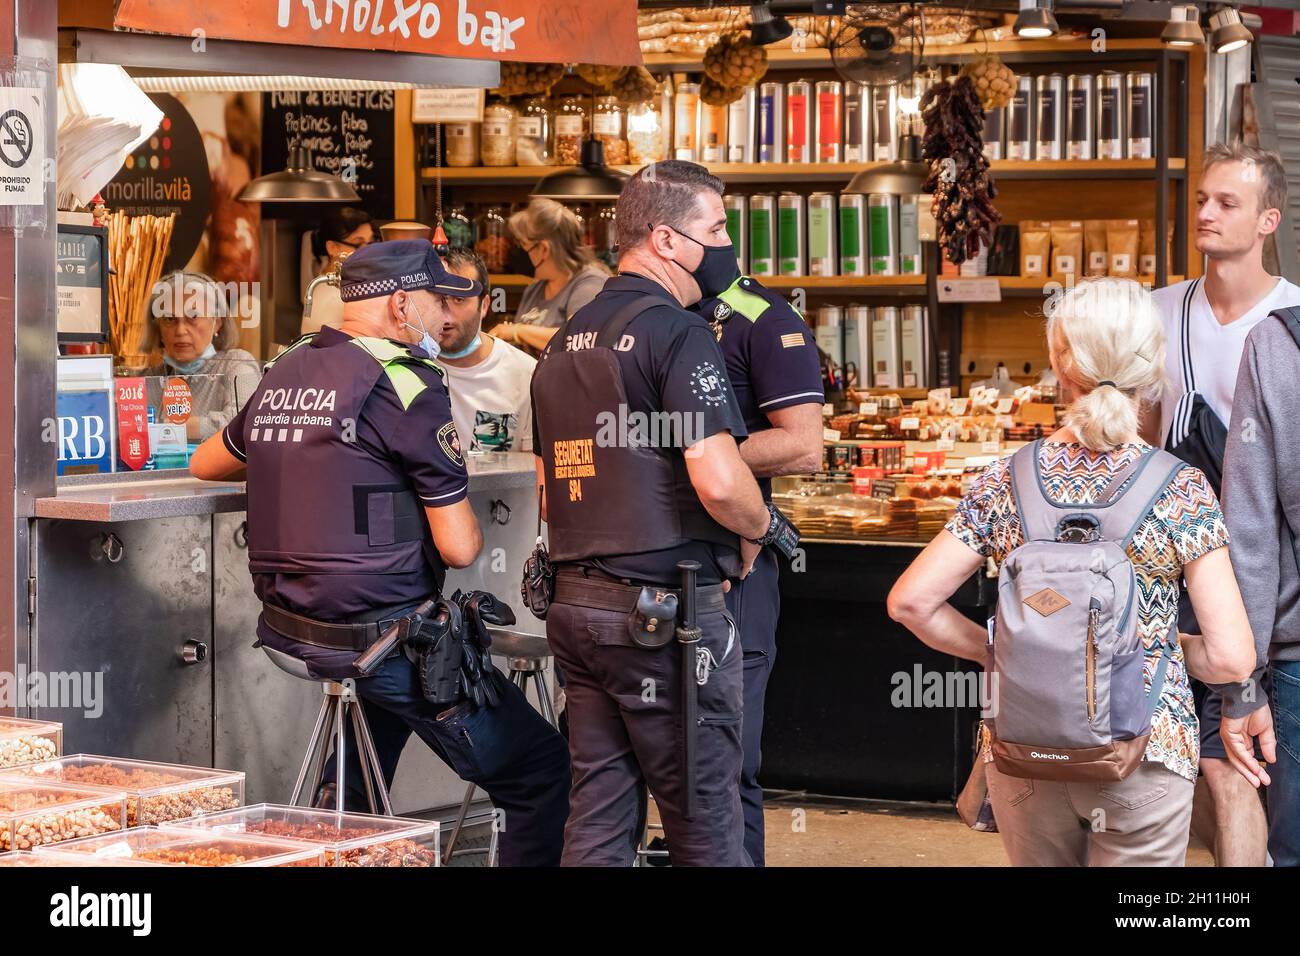 Barcelona, Spain - September 21, 2021: Barcelona Municipal Police, Guardia Urbana, and private security agent taking a rest Stock Photo